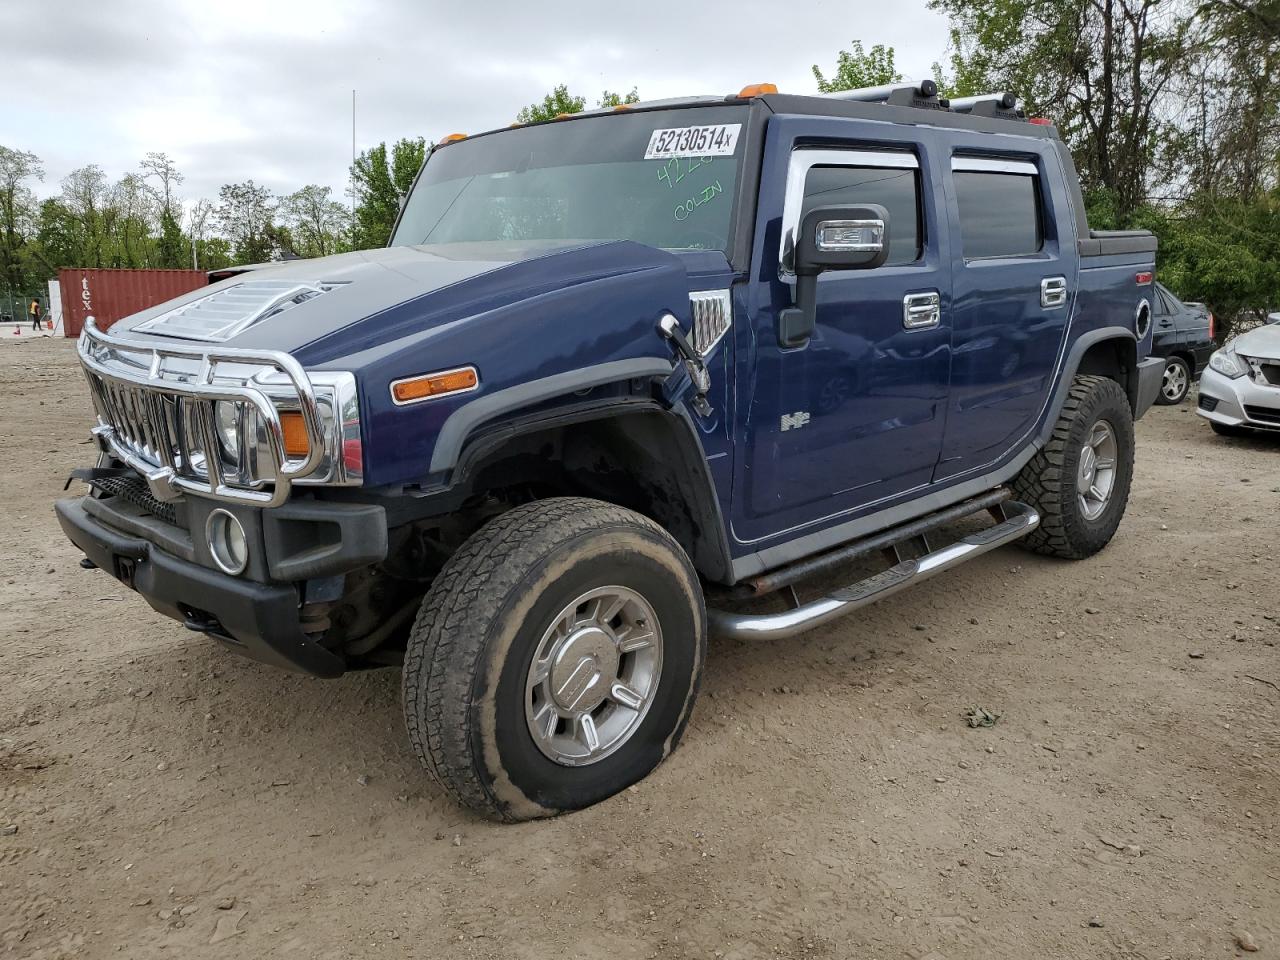 vin: 5GRGN22UX7H106610 5GRGN22UX7H106610 2007 hummer h2 6000 for Sale in 21225, Md - Baltimore East, Baltimore, Maryland, USA